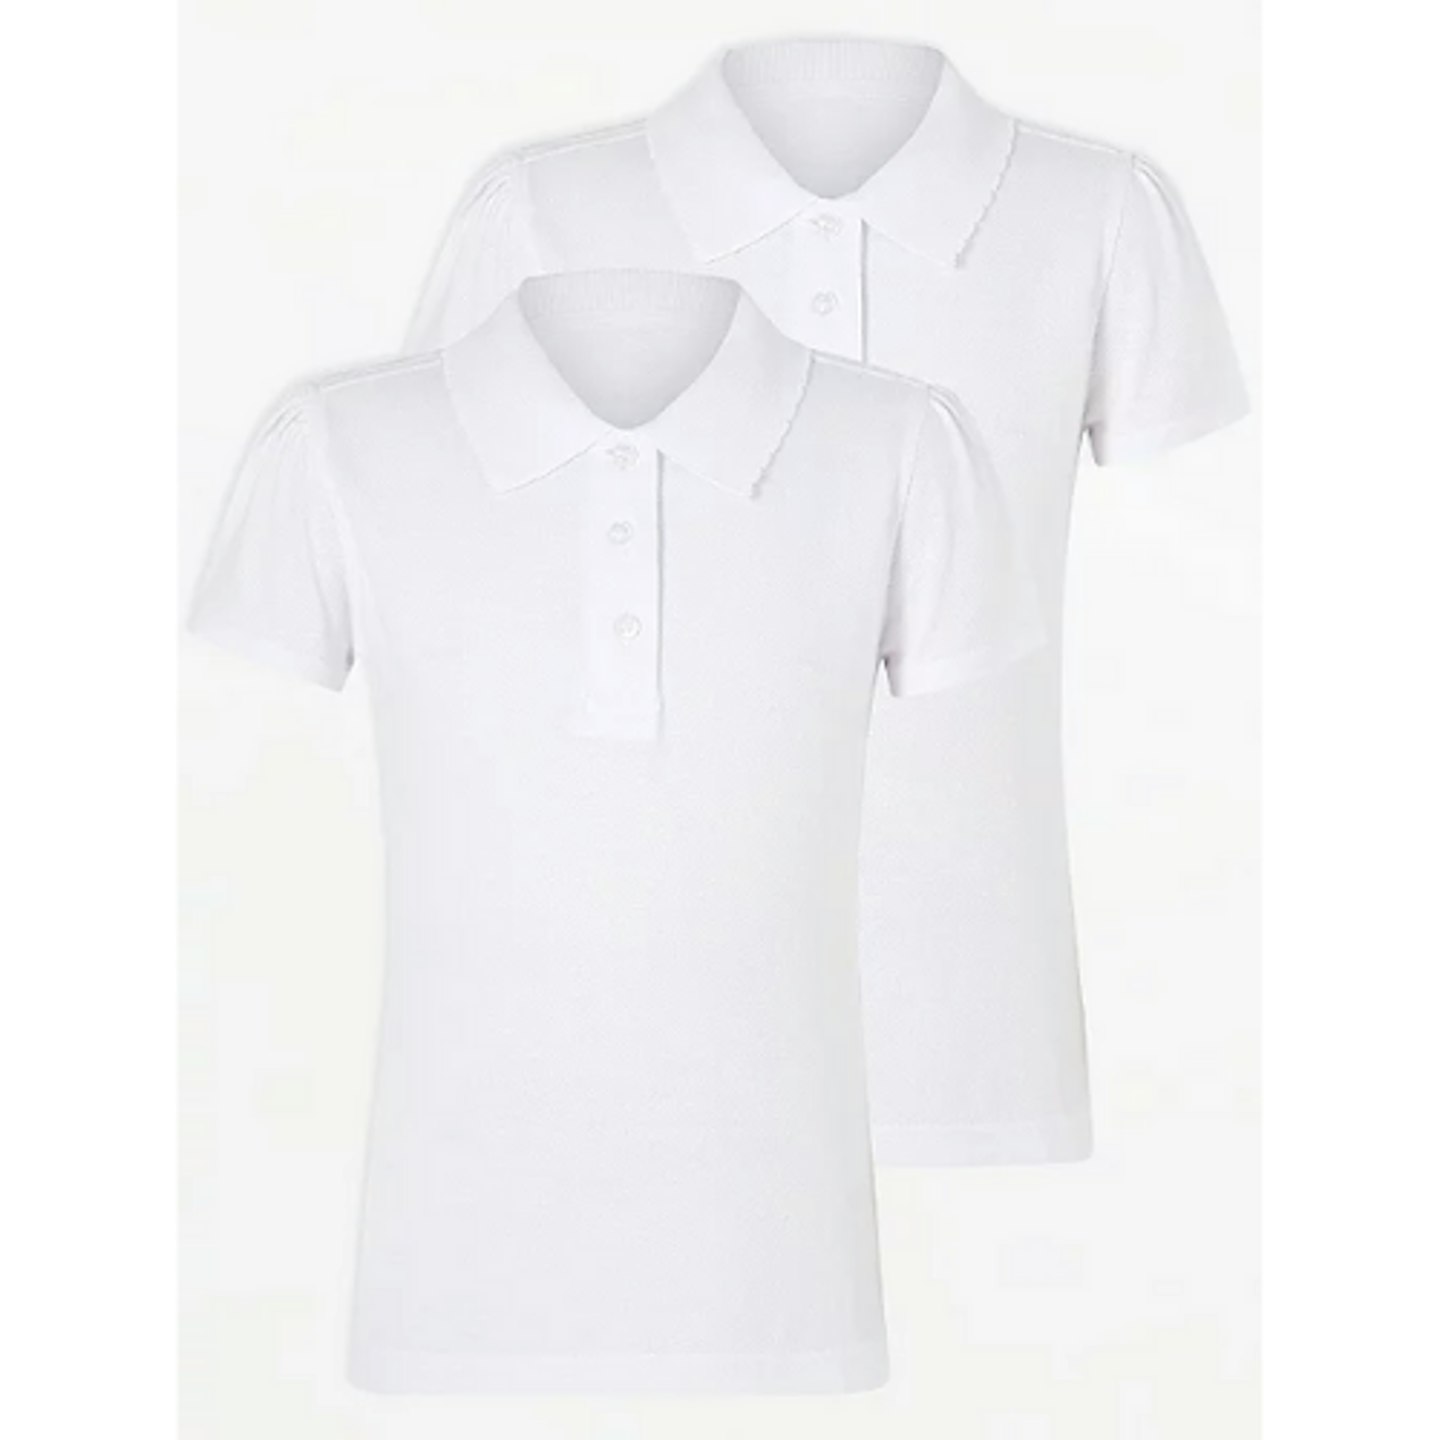 Girls White Scallop School Easy On Polo Shirt (2 Pack)